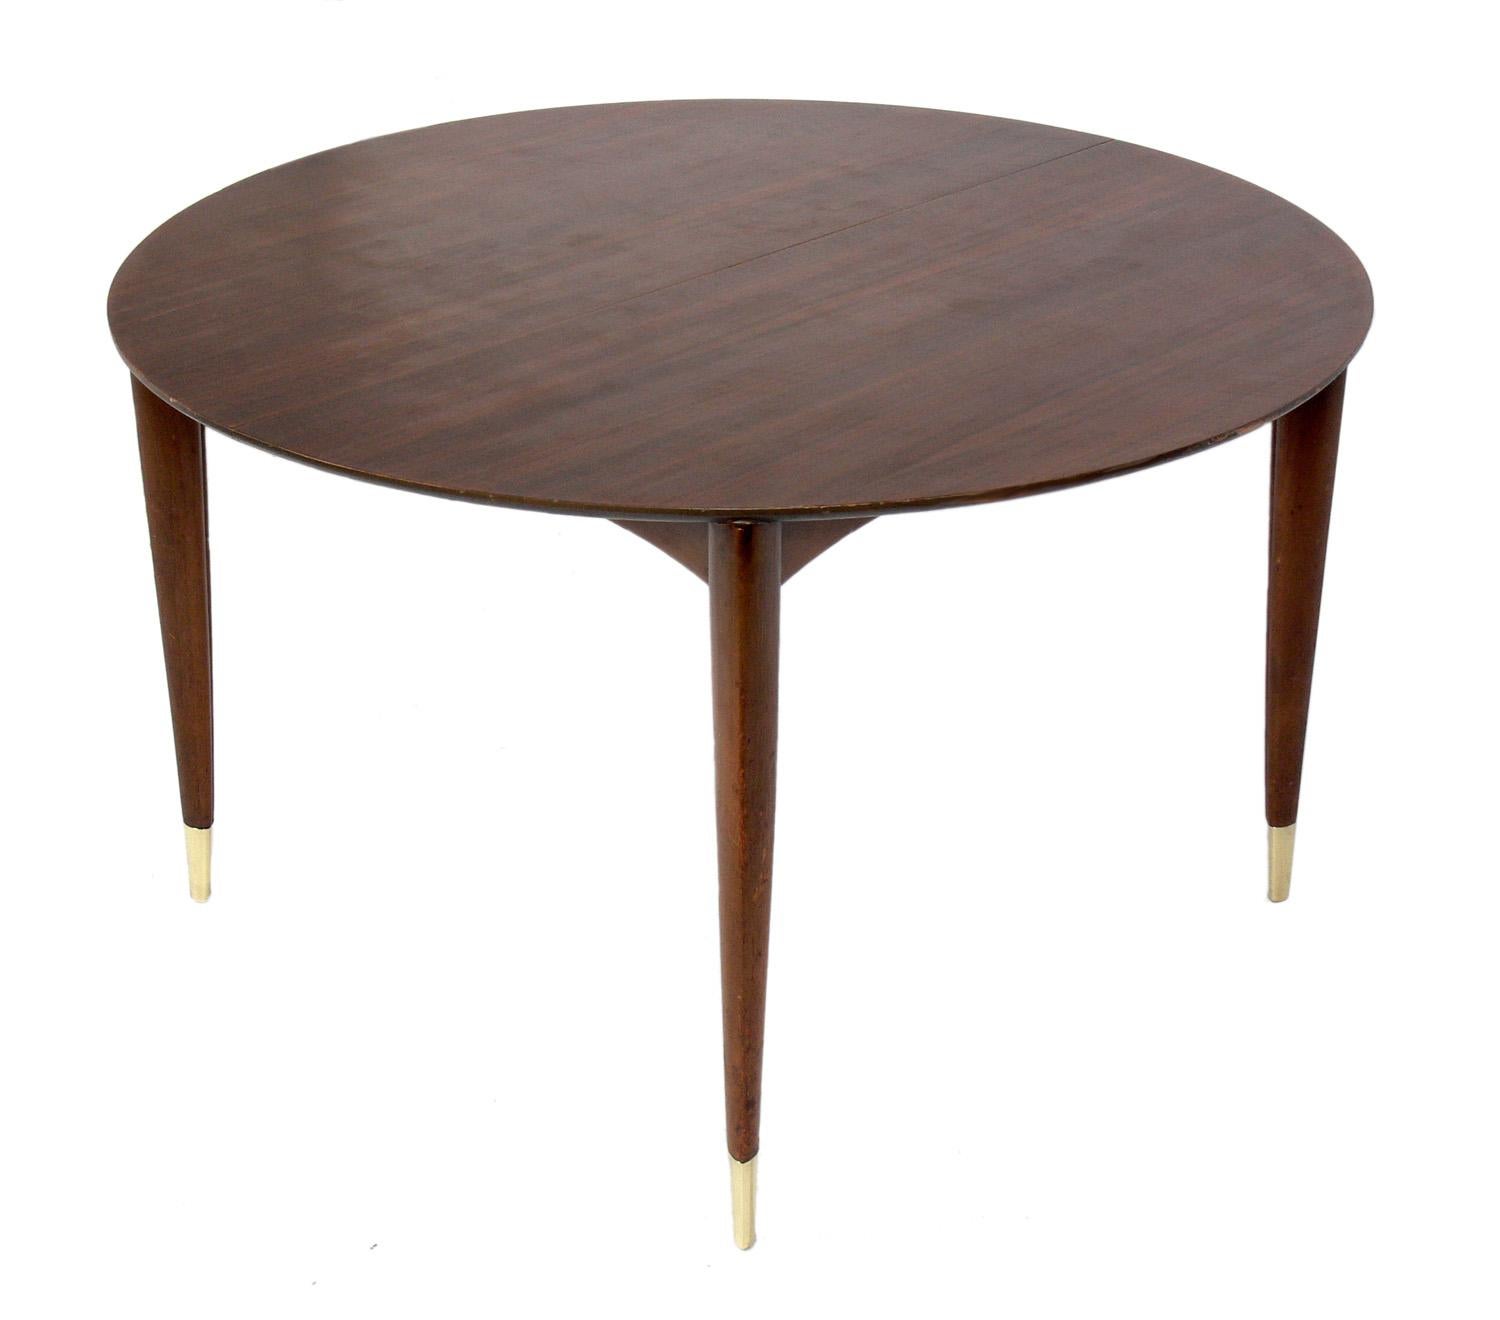 Elegant Italian walnut dining table, designed by Gio Ponti for Singer and Sons, Italy, circa 1950s. With all four leaves of it's leaves installed, the table measures an impressive 104